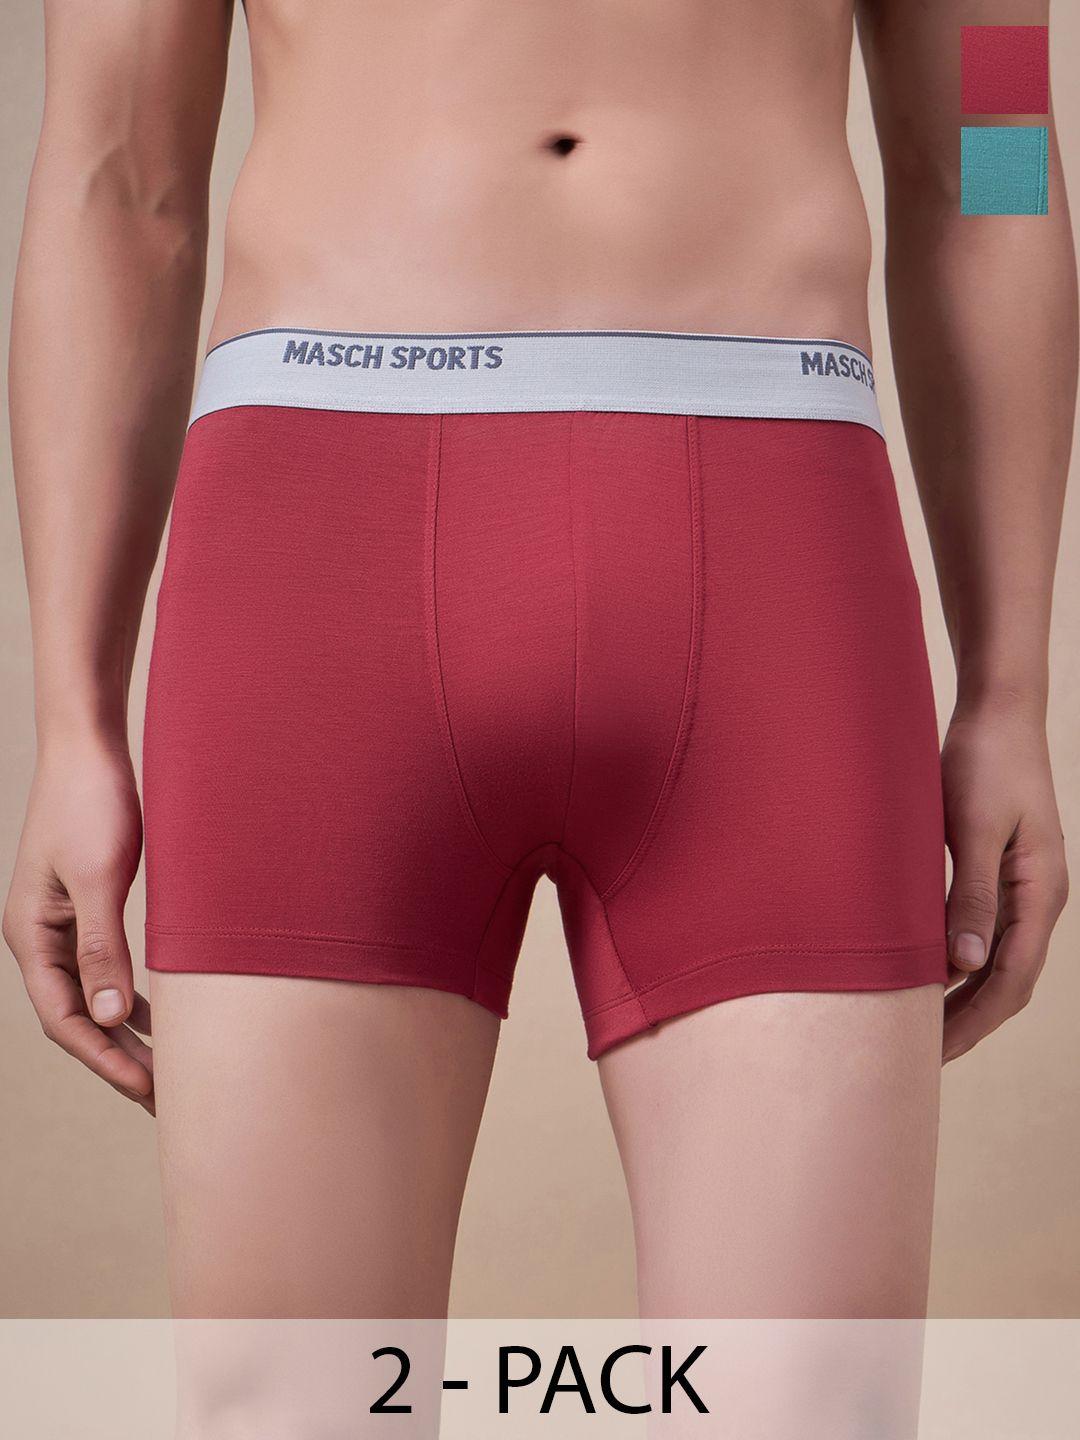 masch sports pack of 2 antimicrobial trunks trk-2-sol-et-red-grn